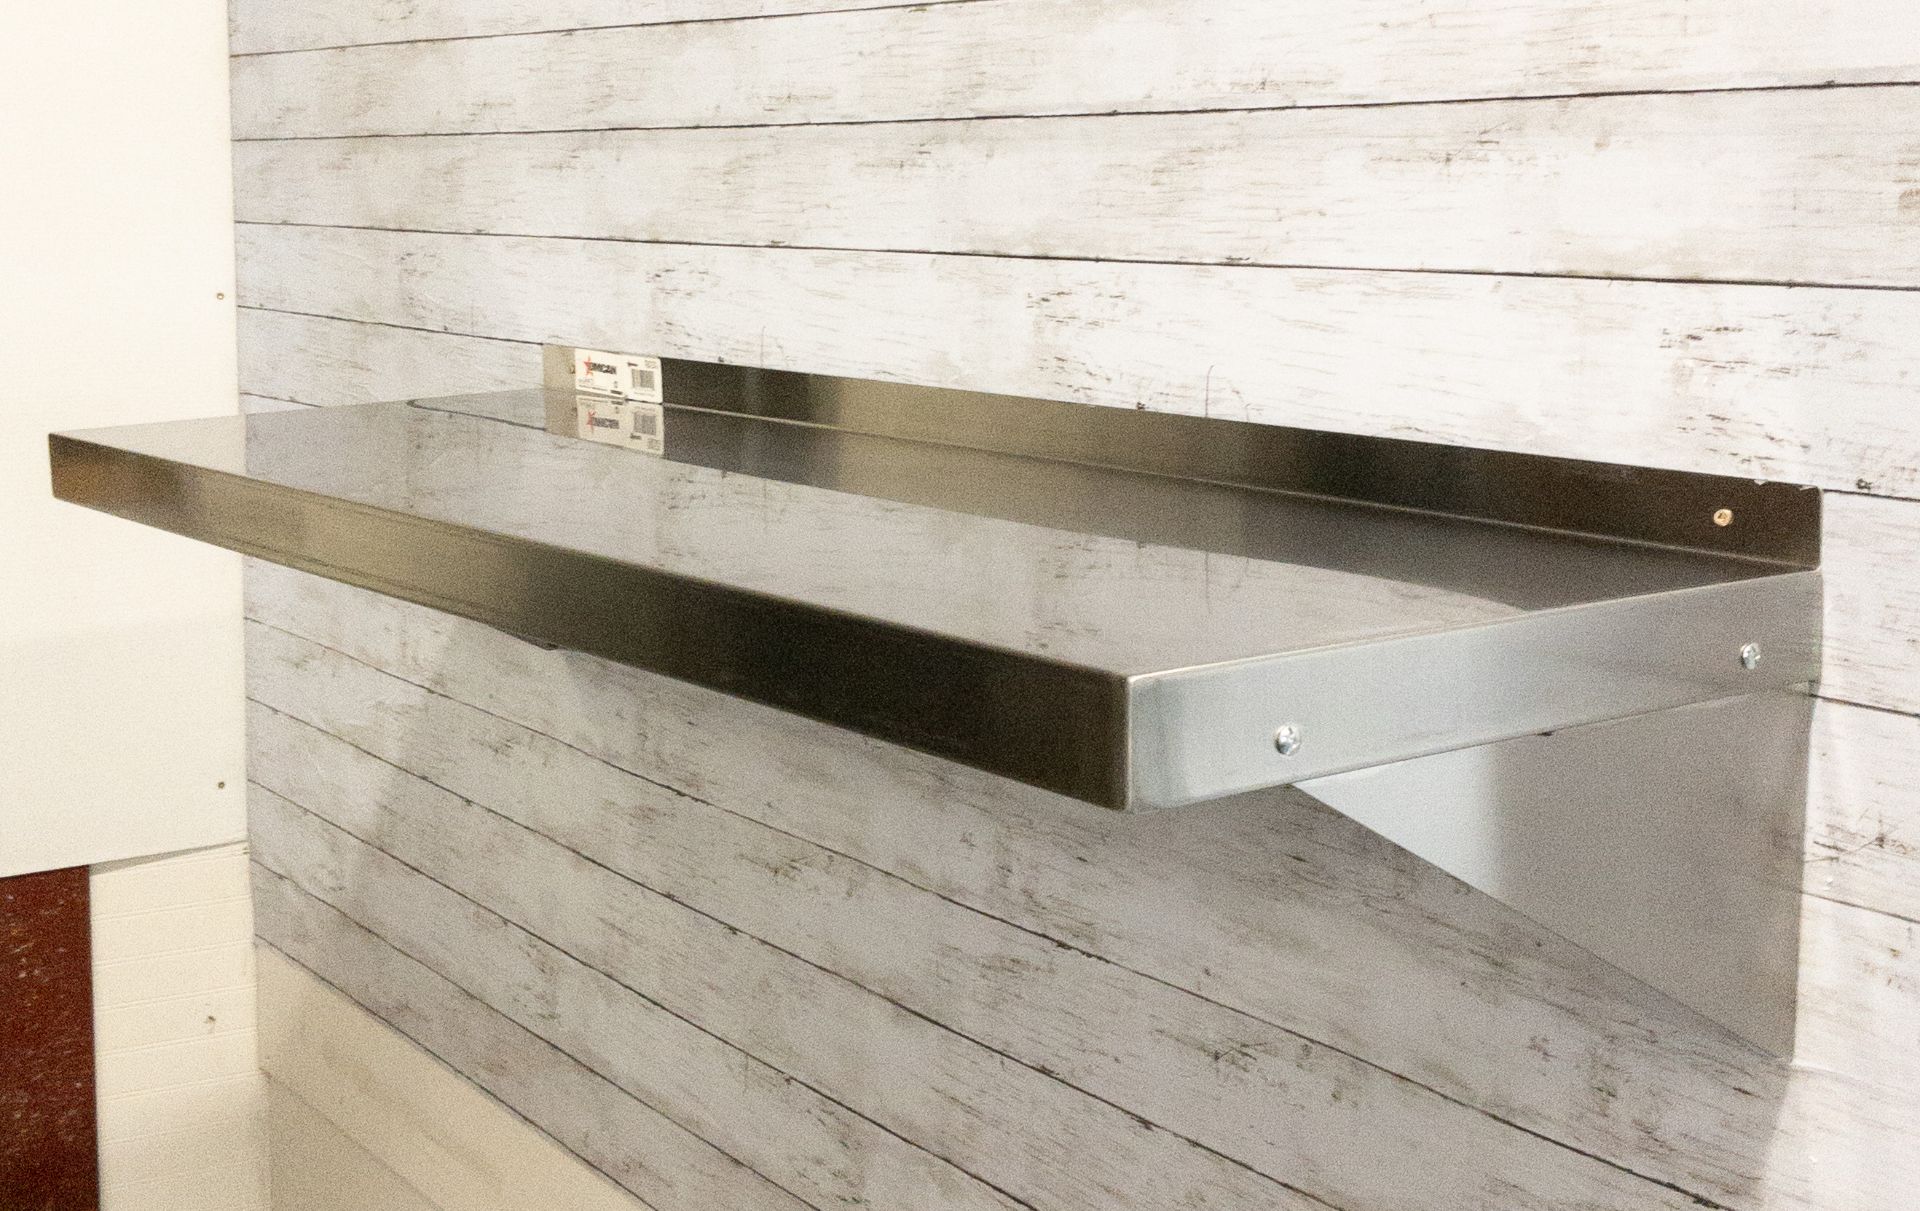 16" X 48" STAINLESS STEEL SHELF, OMCAN 24410 - Image 2 of 5